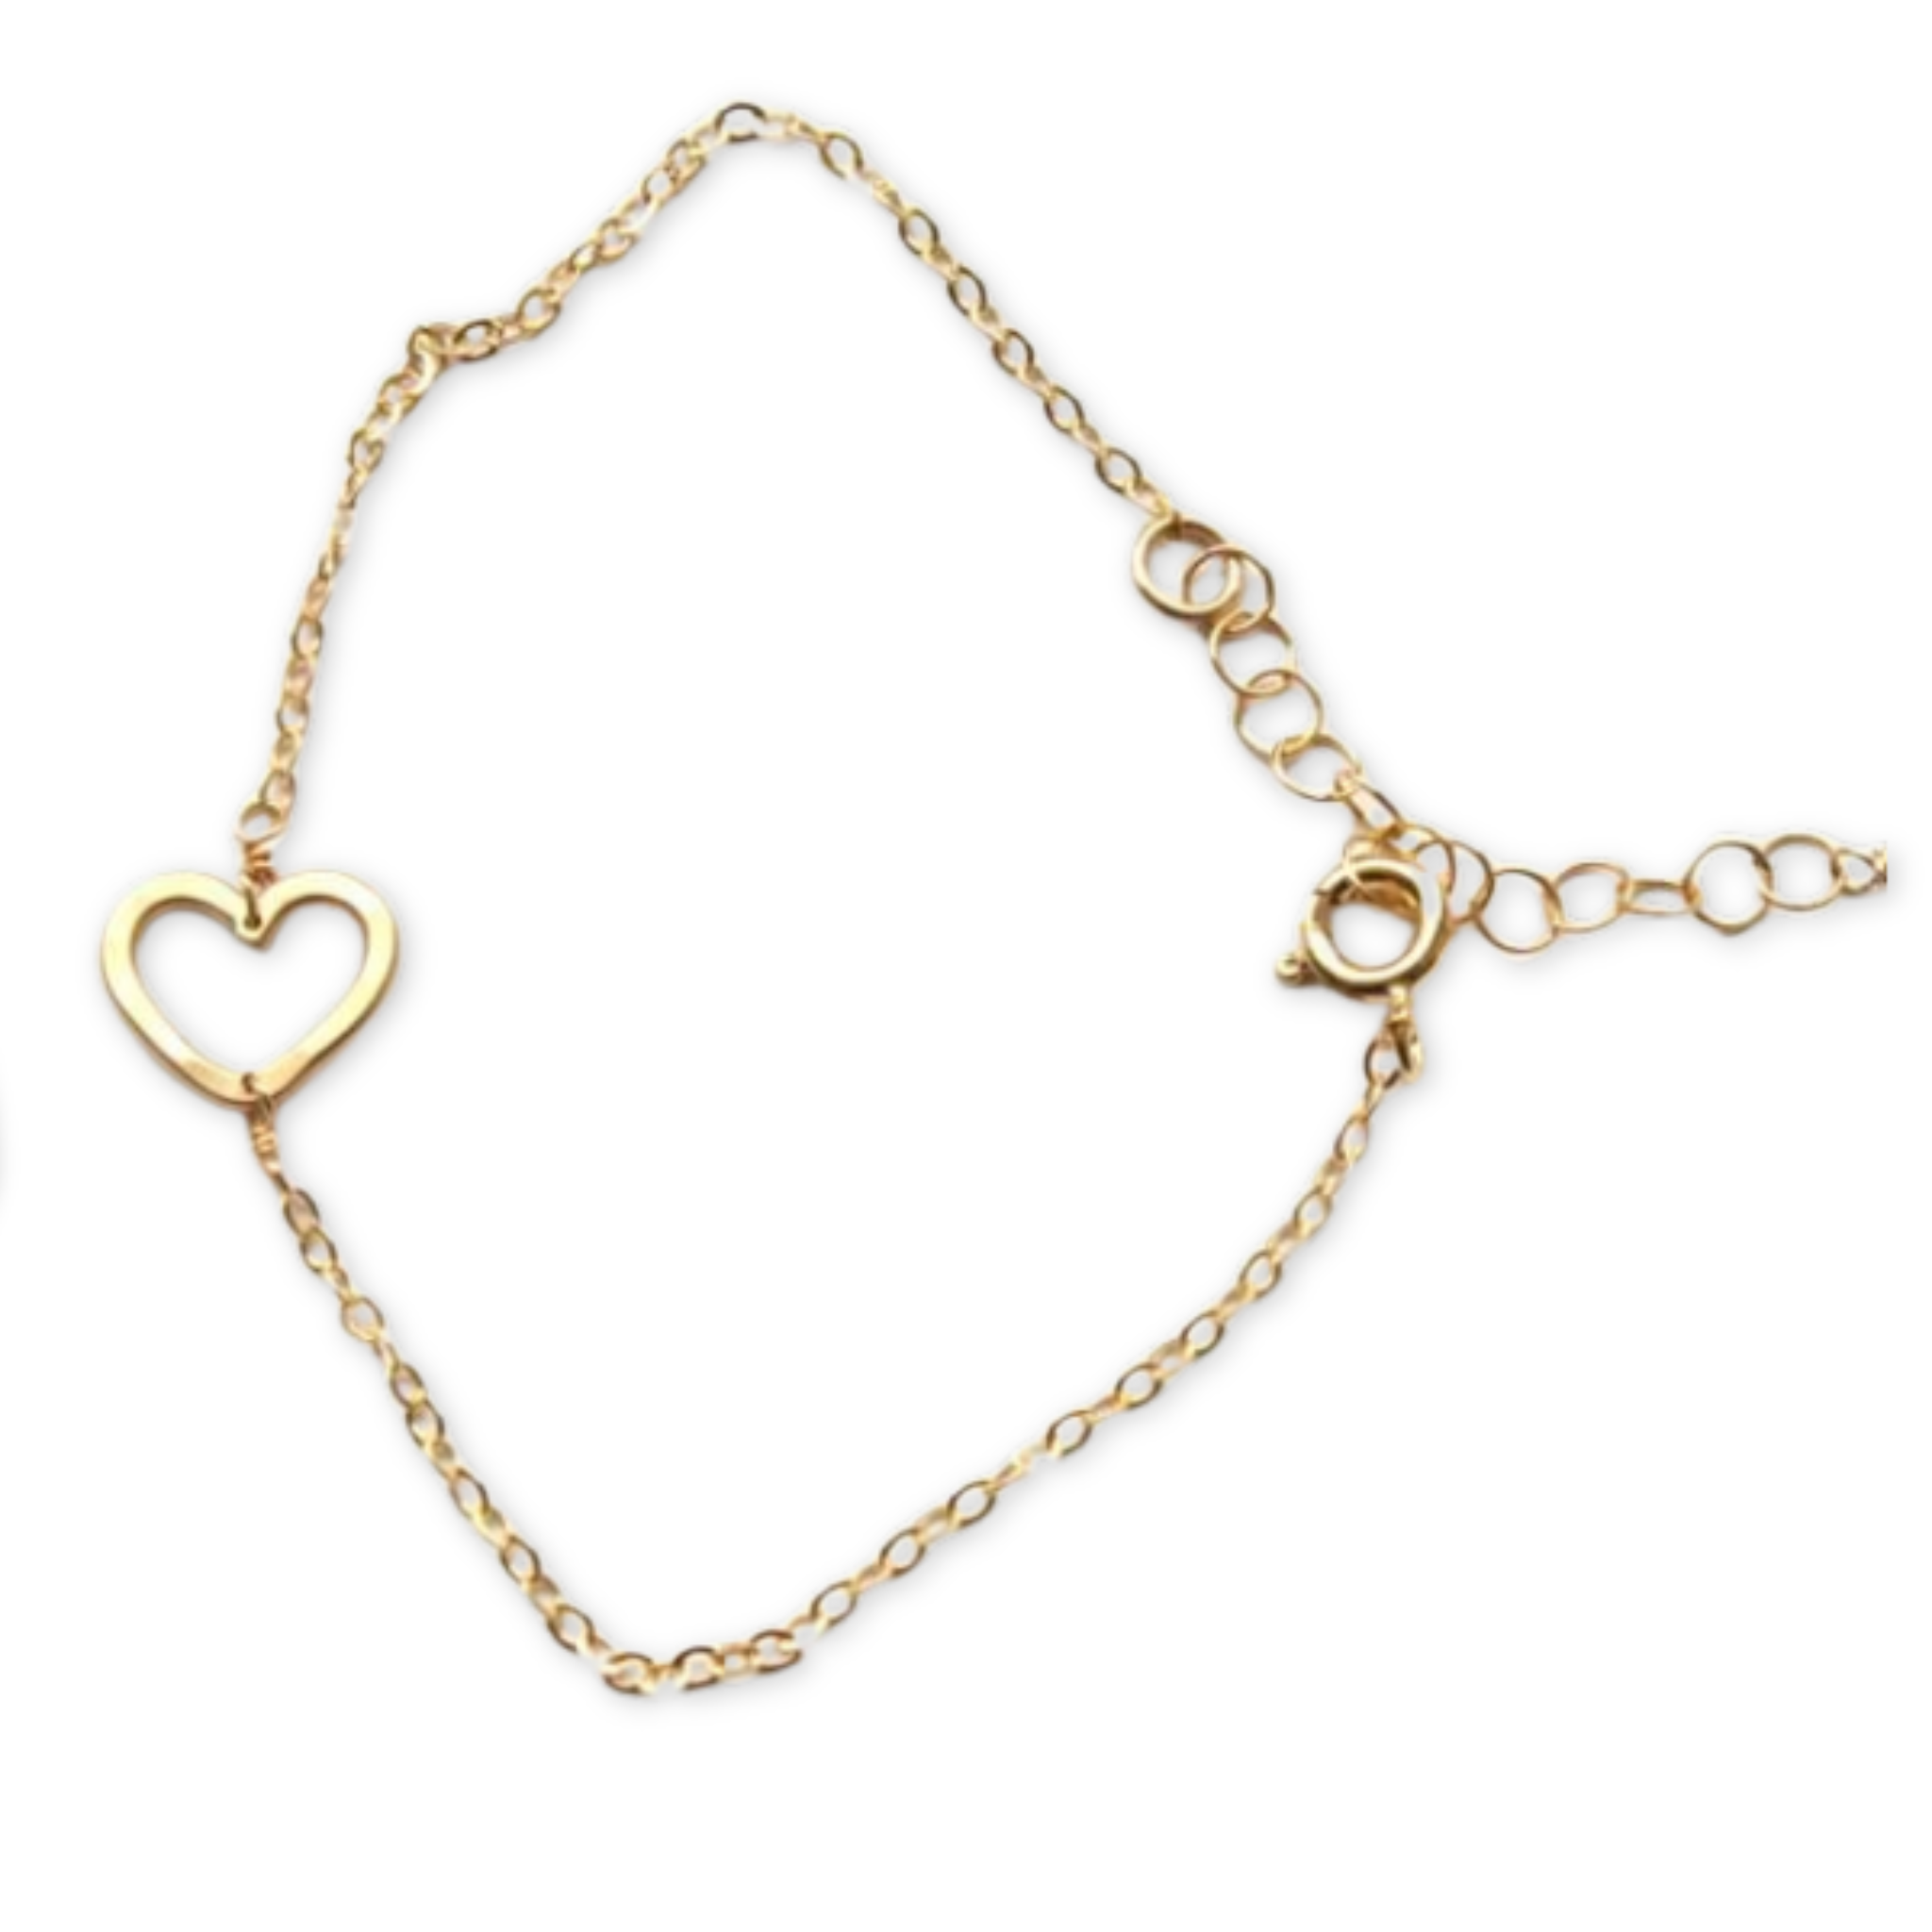 adjustable chain bracelet with a sideways hammered heart charm